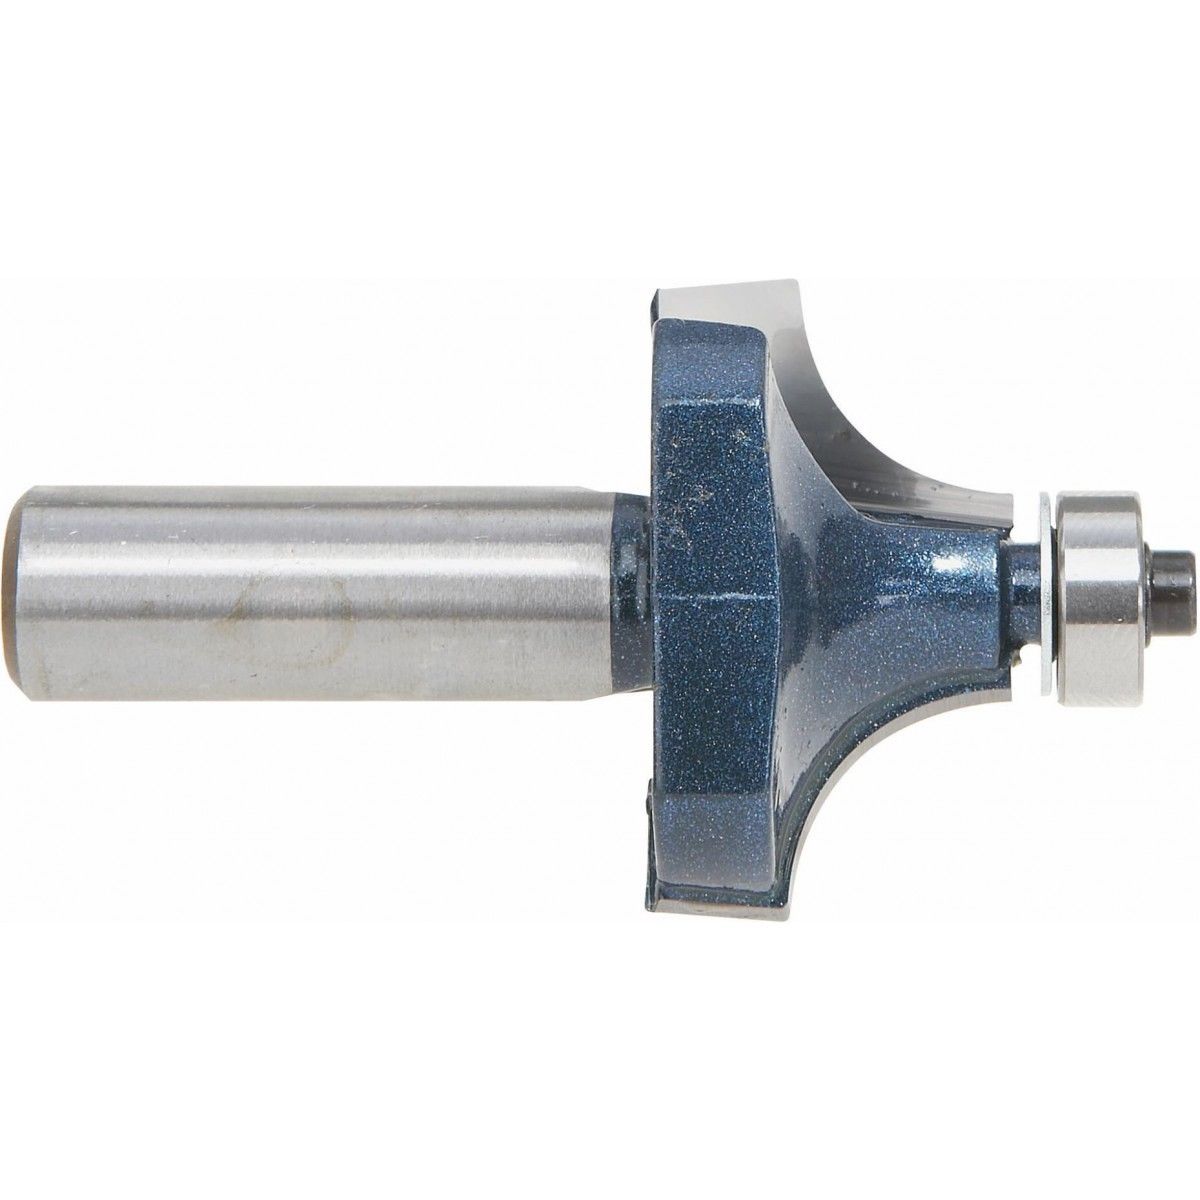 Bosch 85597MC 1-1/4" Carbide Tipped 45° Chamfer Router Bit With 1/2" Shank